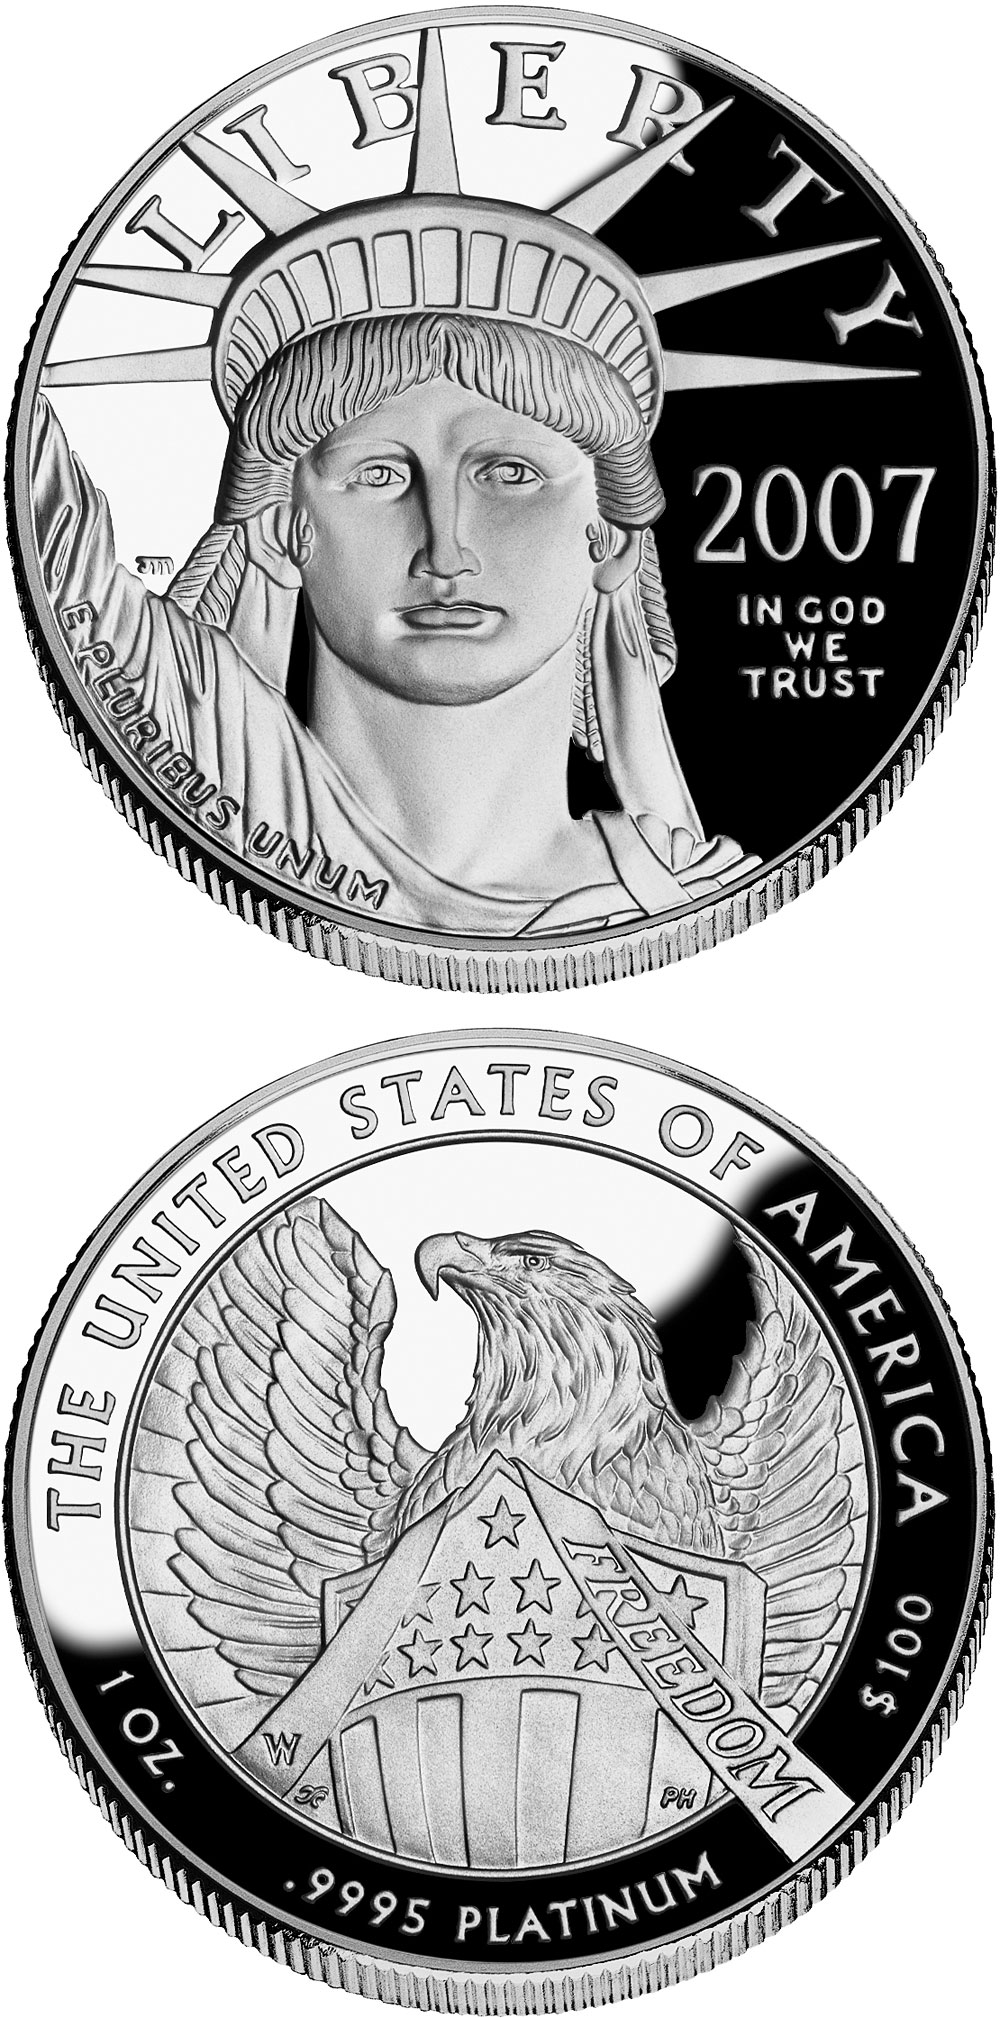 Image of 100 dollars coin - American Eagle Platinum One Ounce Proof Coin | USA 2007